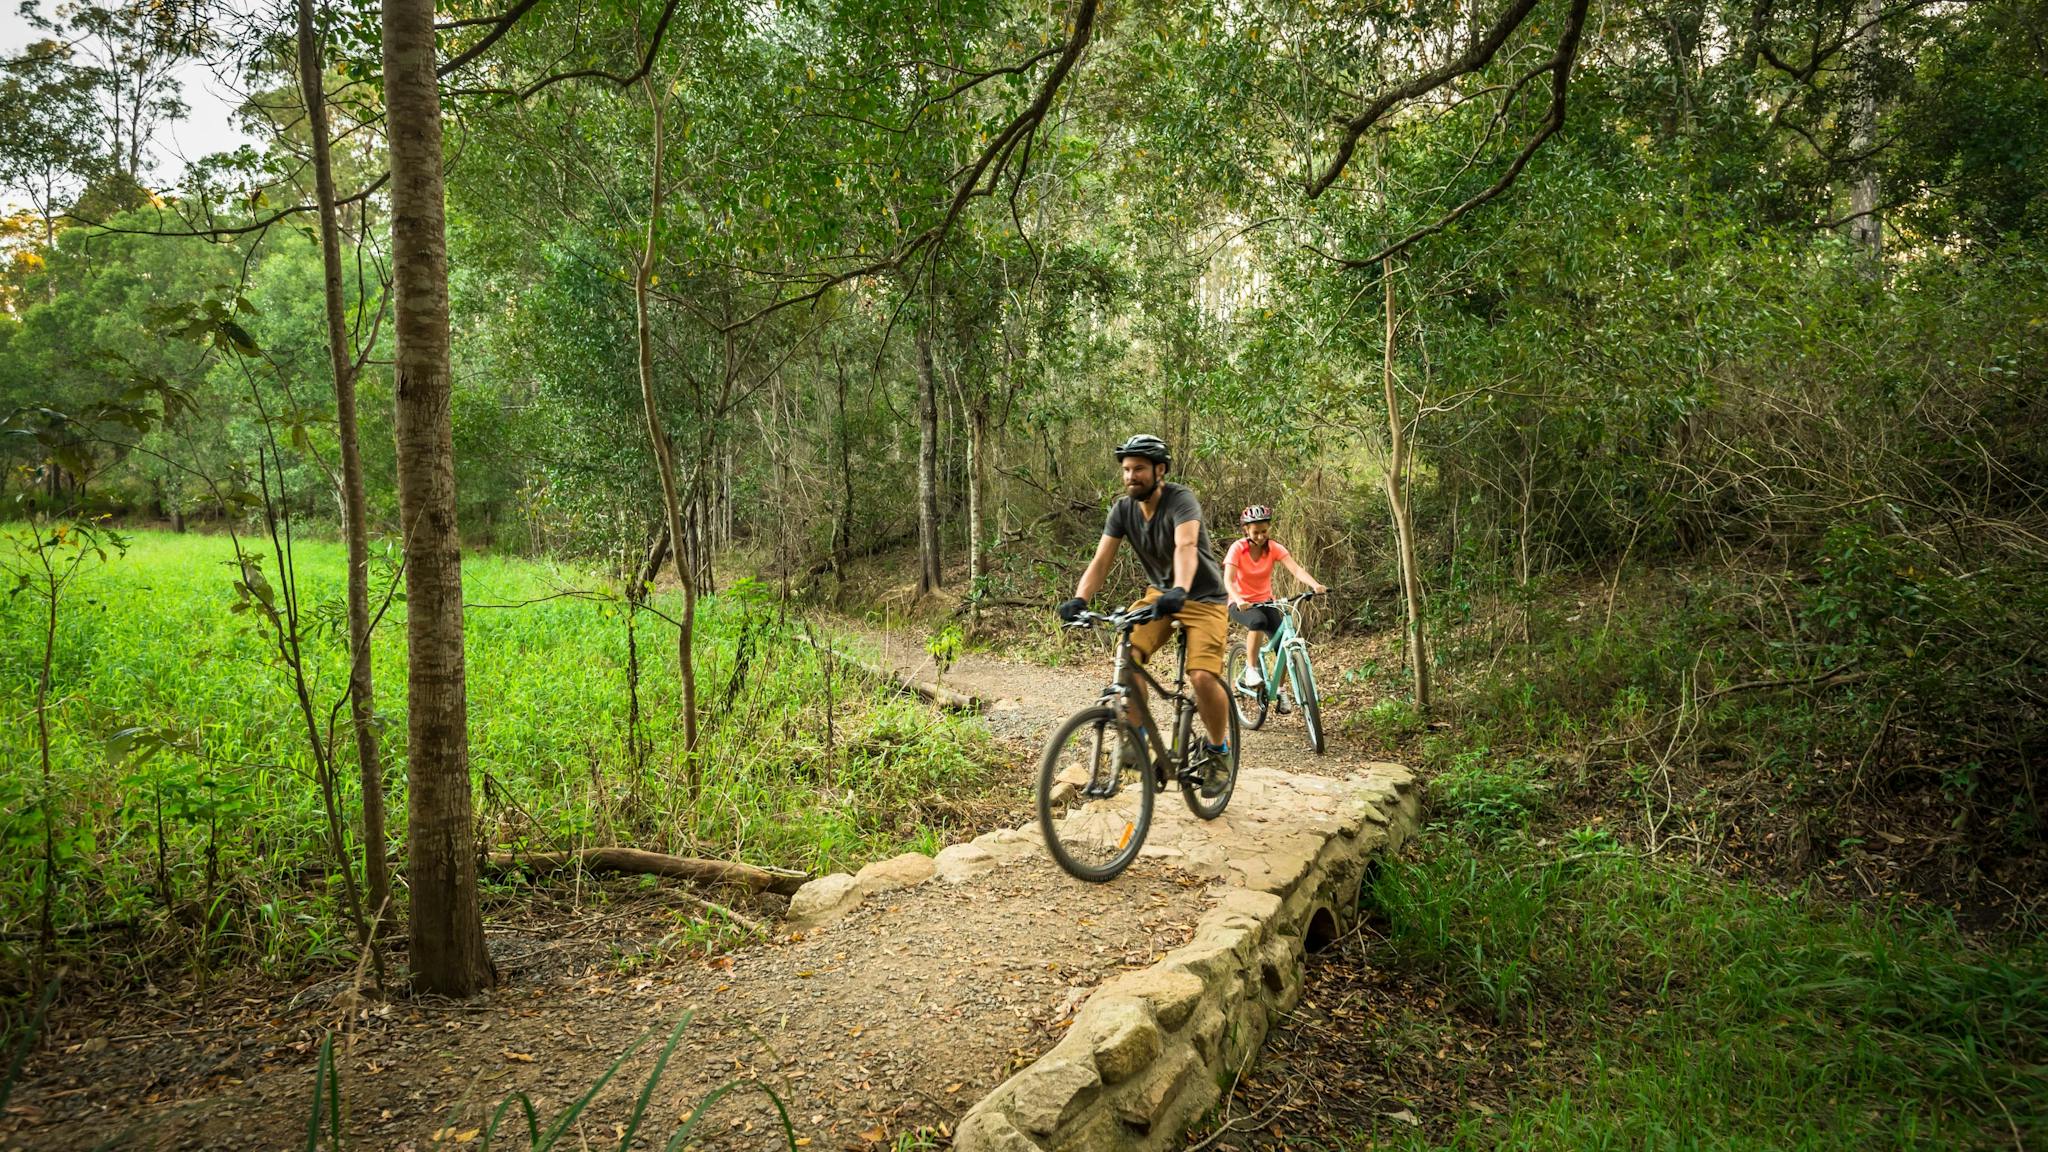 Mountain bikers on the trails of D'Aguilar National Park.